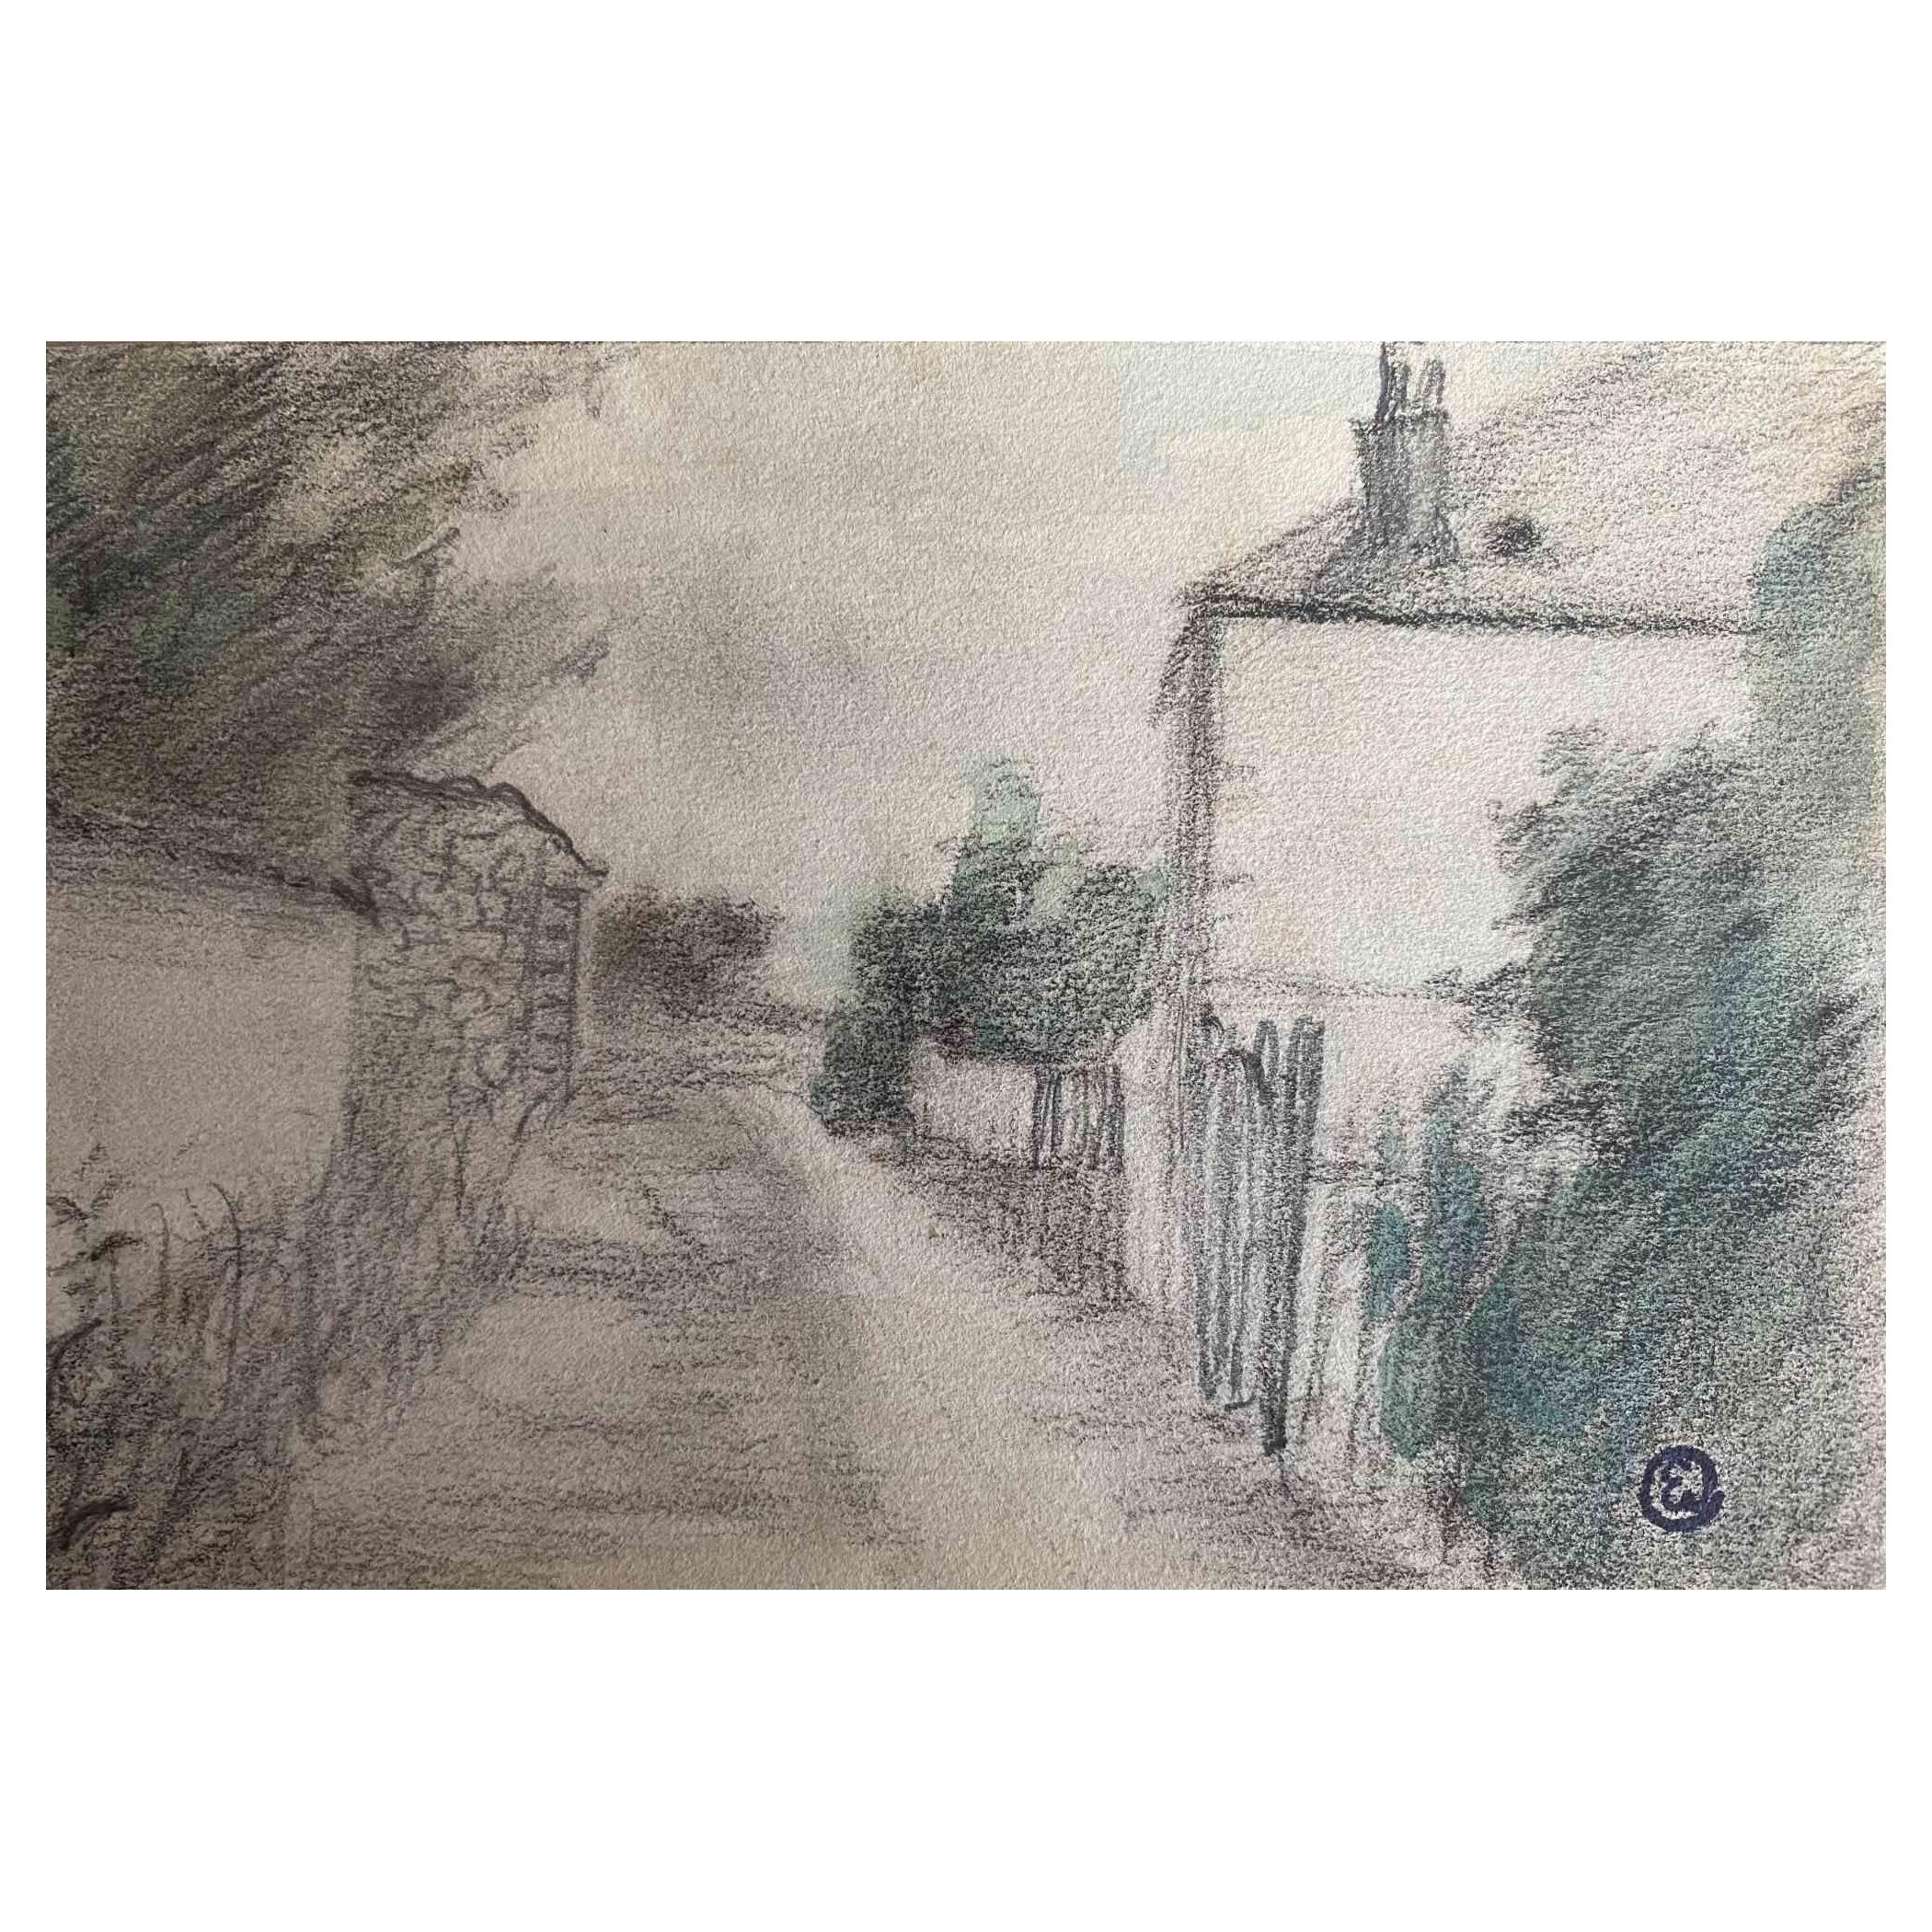 Landscape is an original drawing in pencil realized in the early 20th Century by Edmond Cuisinier (1857-1917).

Monogrammed on the lower.

Good conditions.

The artwork is depicted through deft strokes poetically.